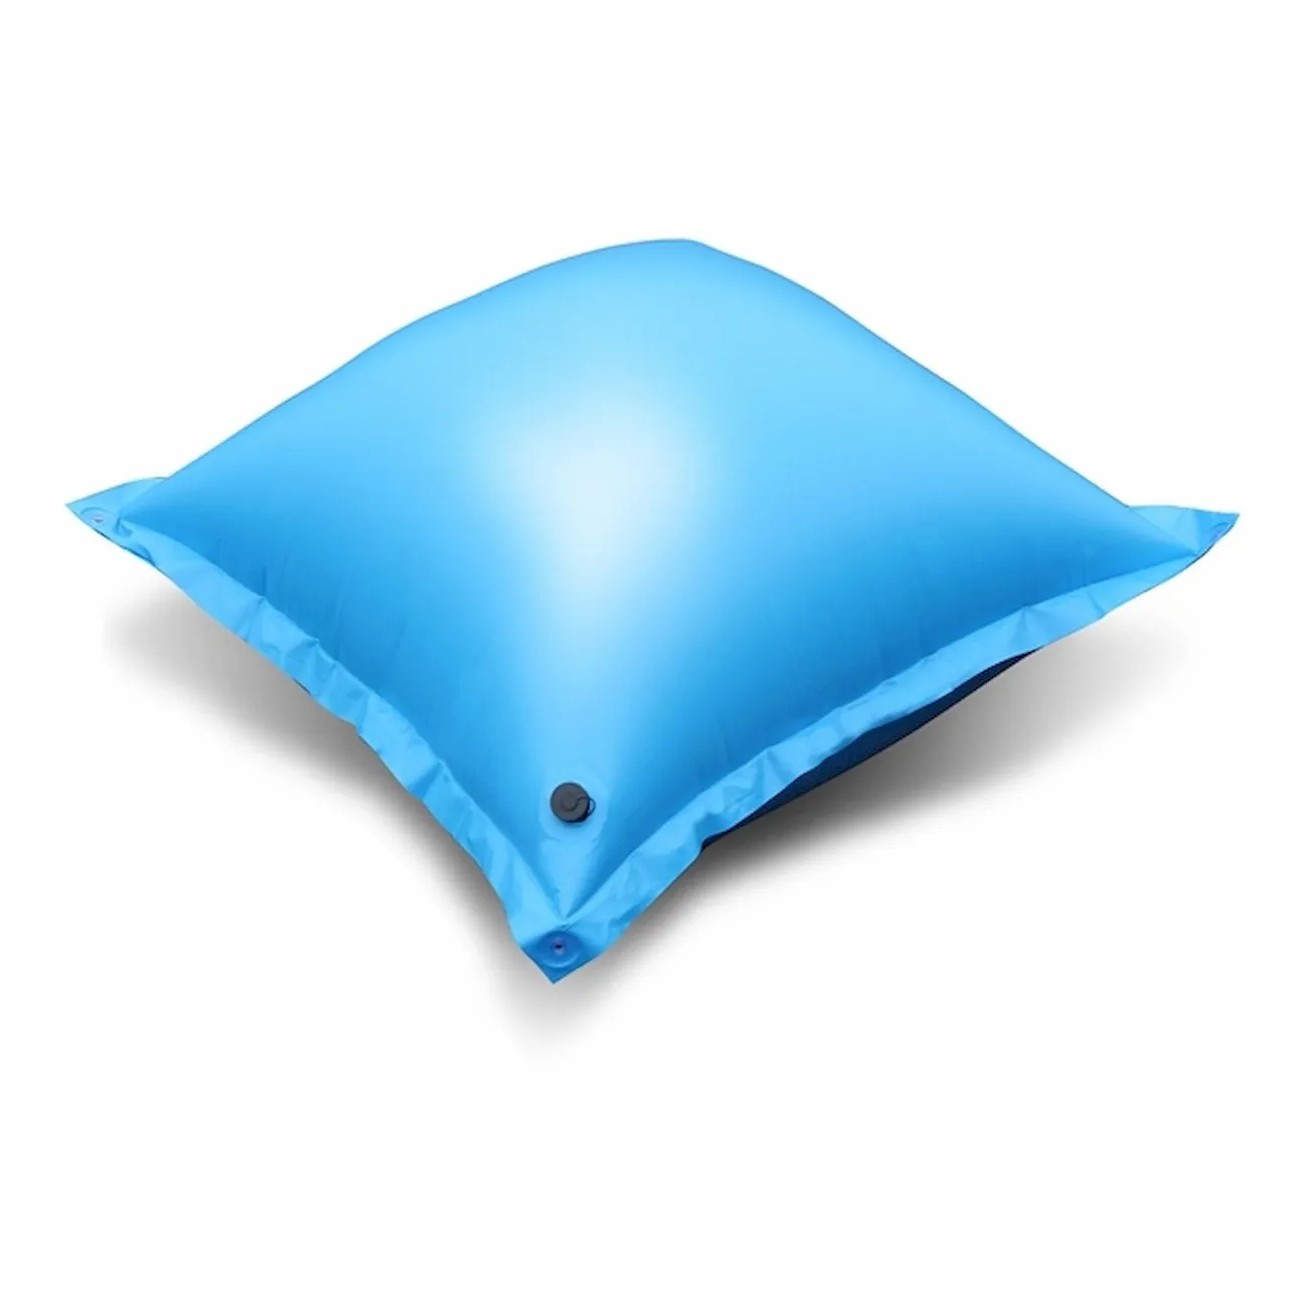 Winter cushion for pool cover